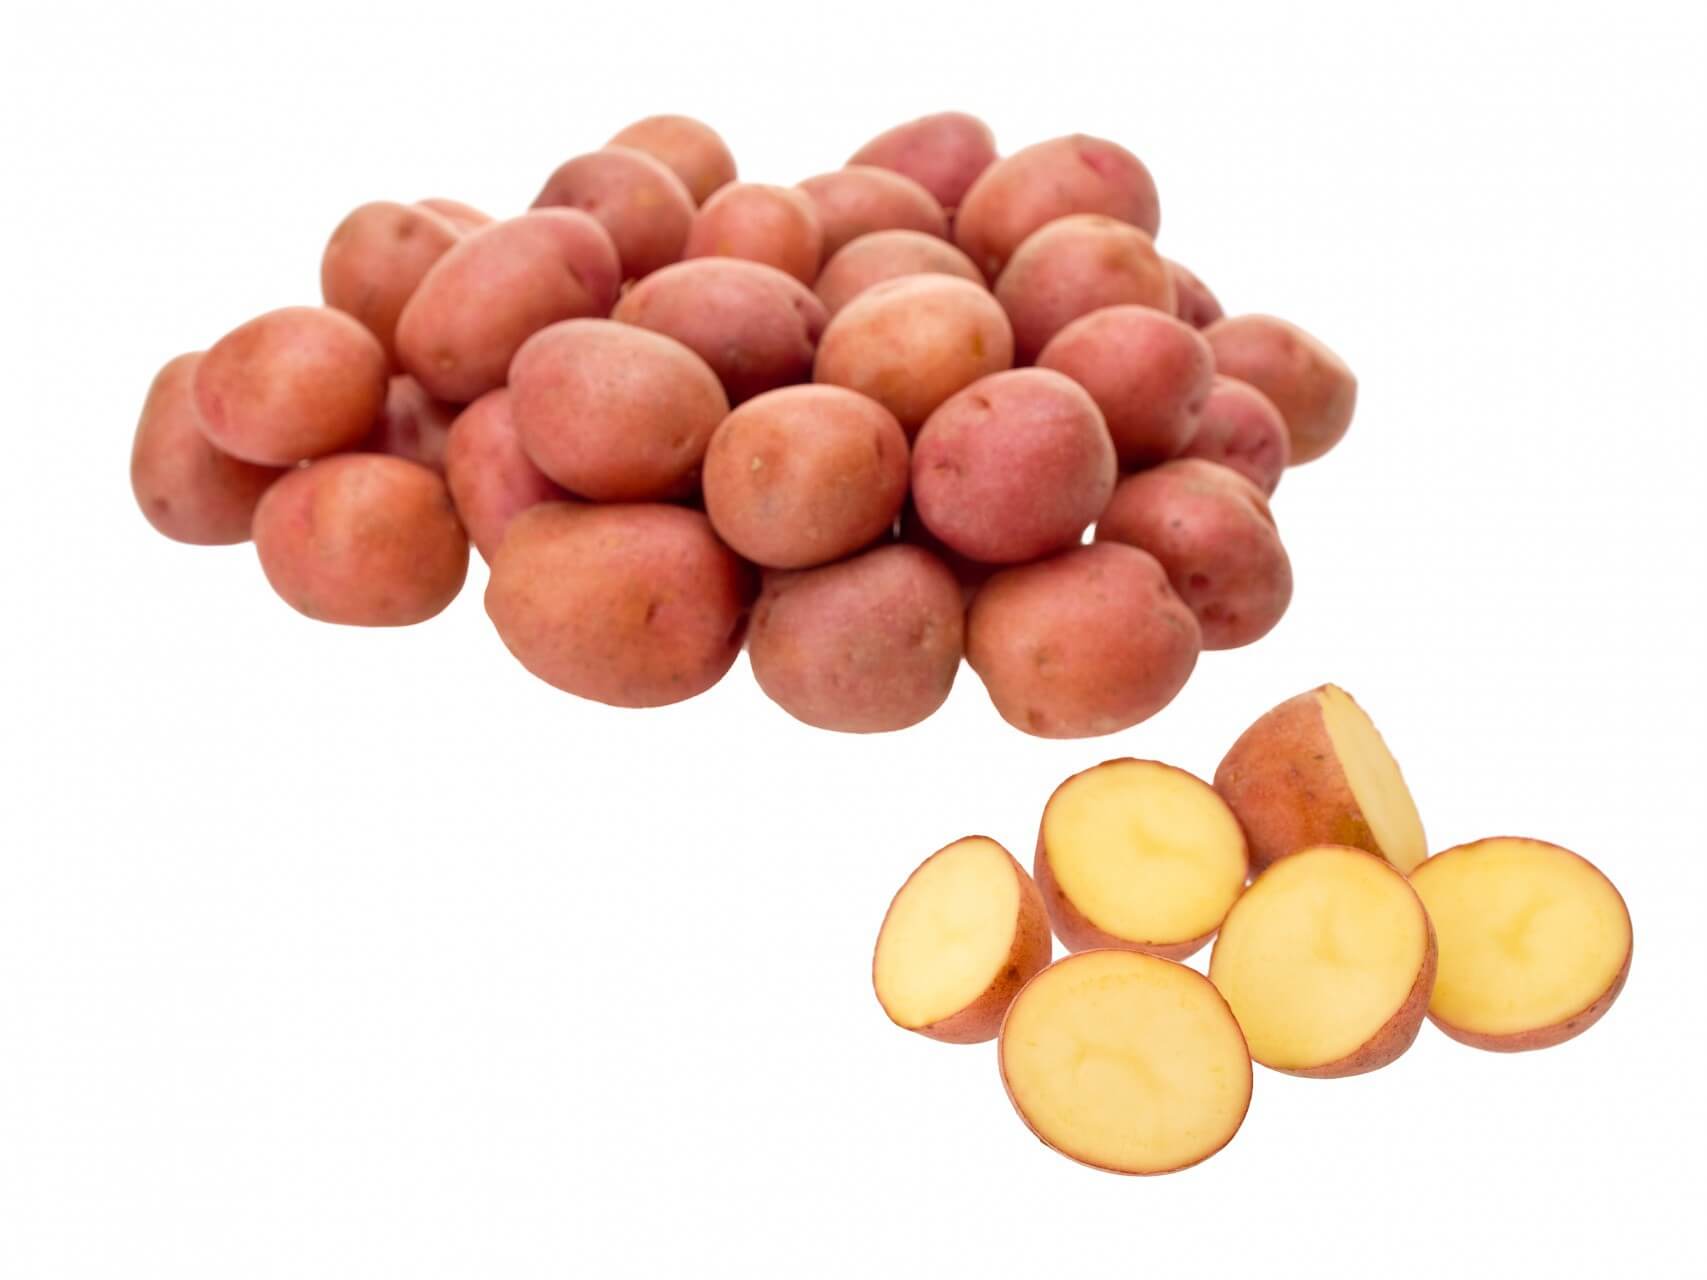 Red Potatoes Logo - Red Potato Varieties & Red Potato Products